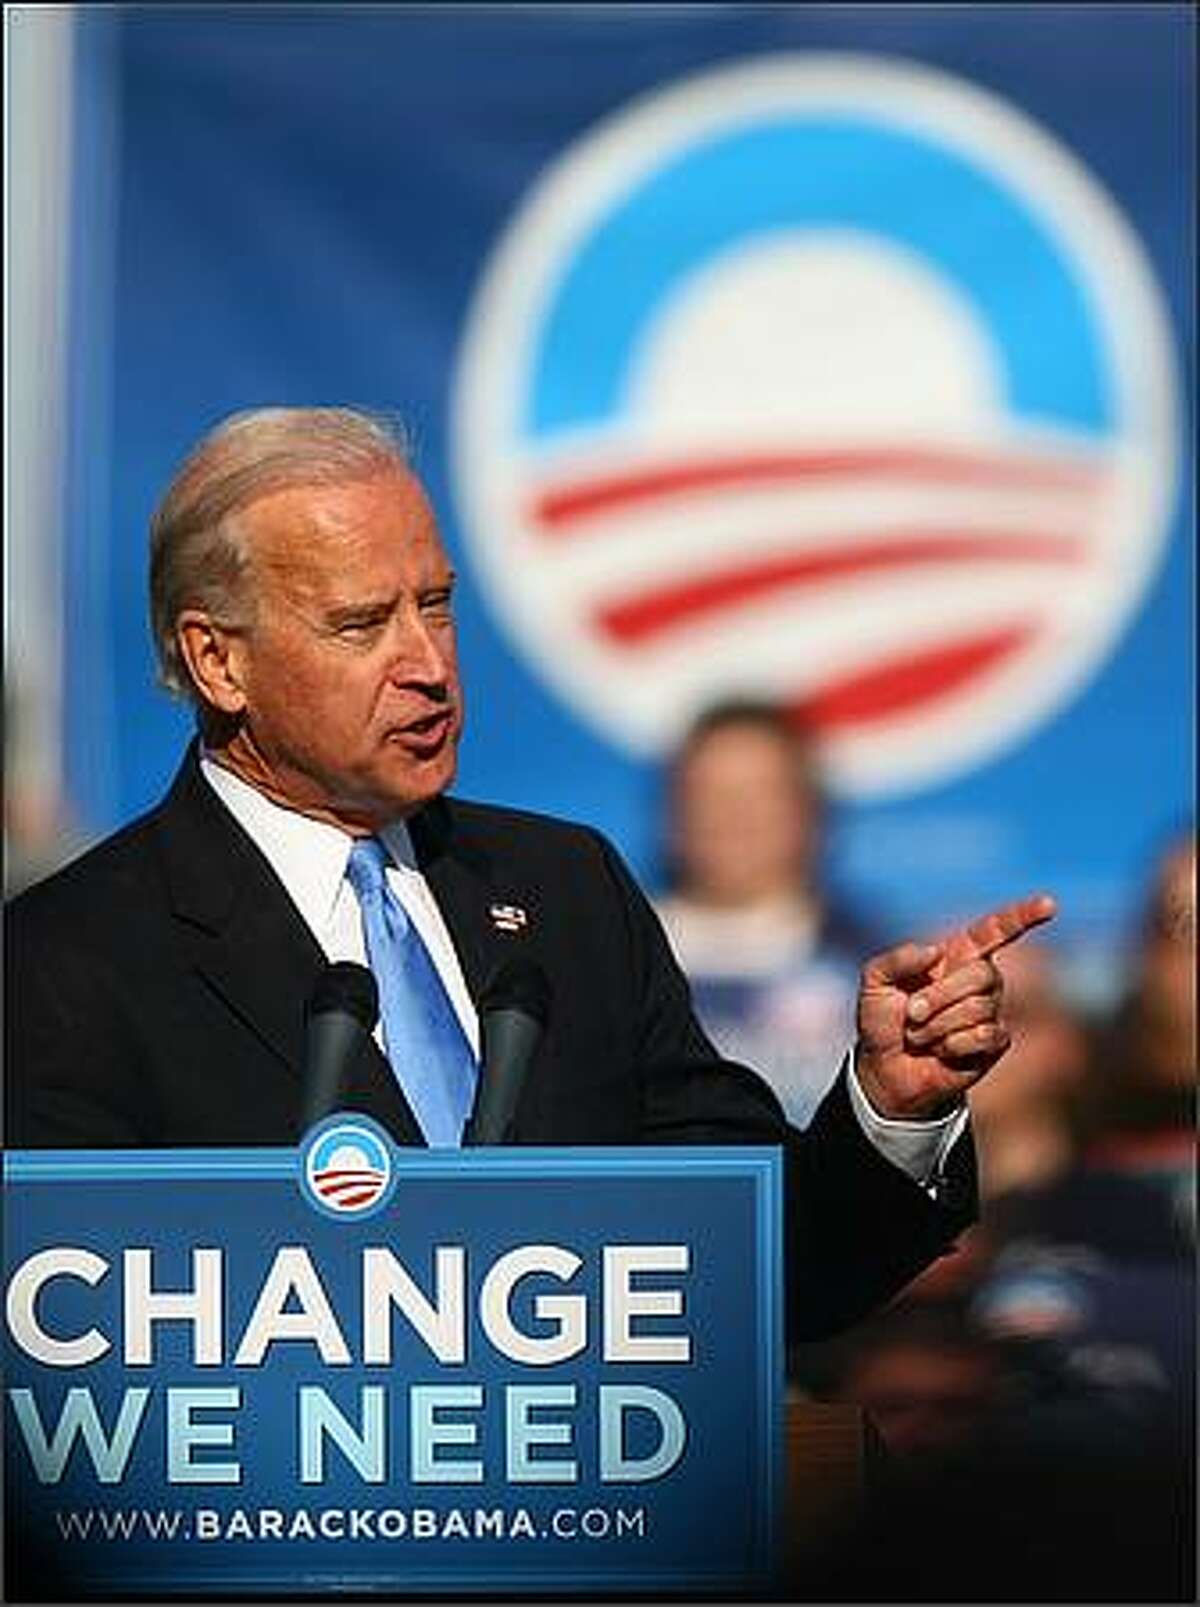 Democratic Vice Presidential candidate Joe Biden speaks to the crowd at Cheney Stadium in Tacoma.